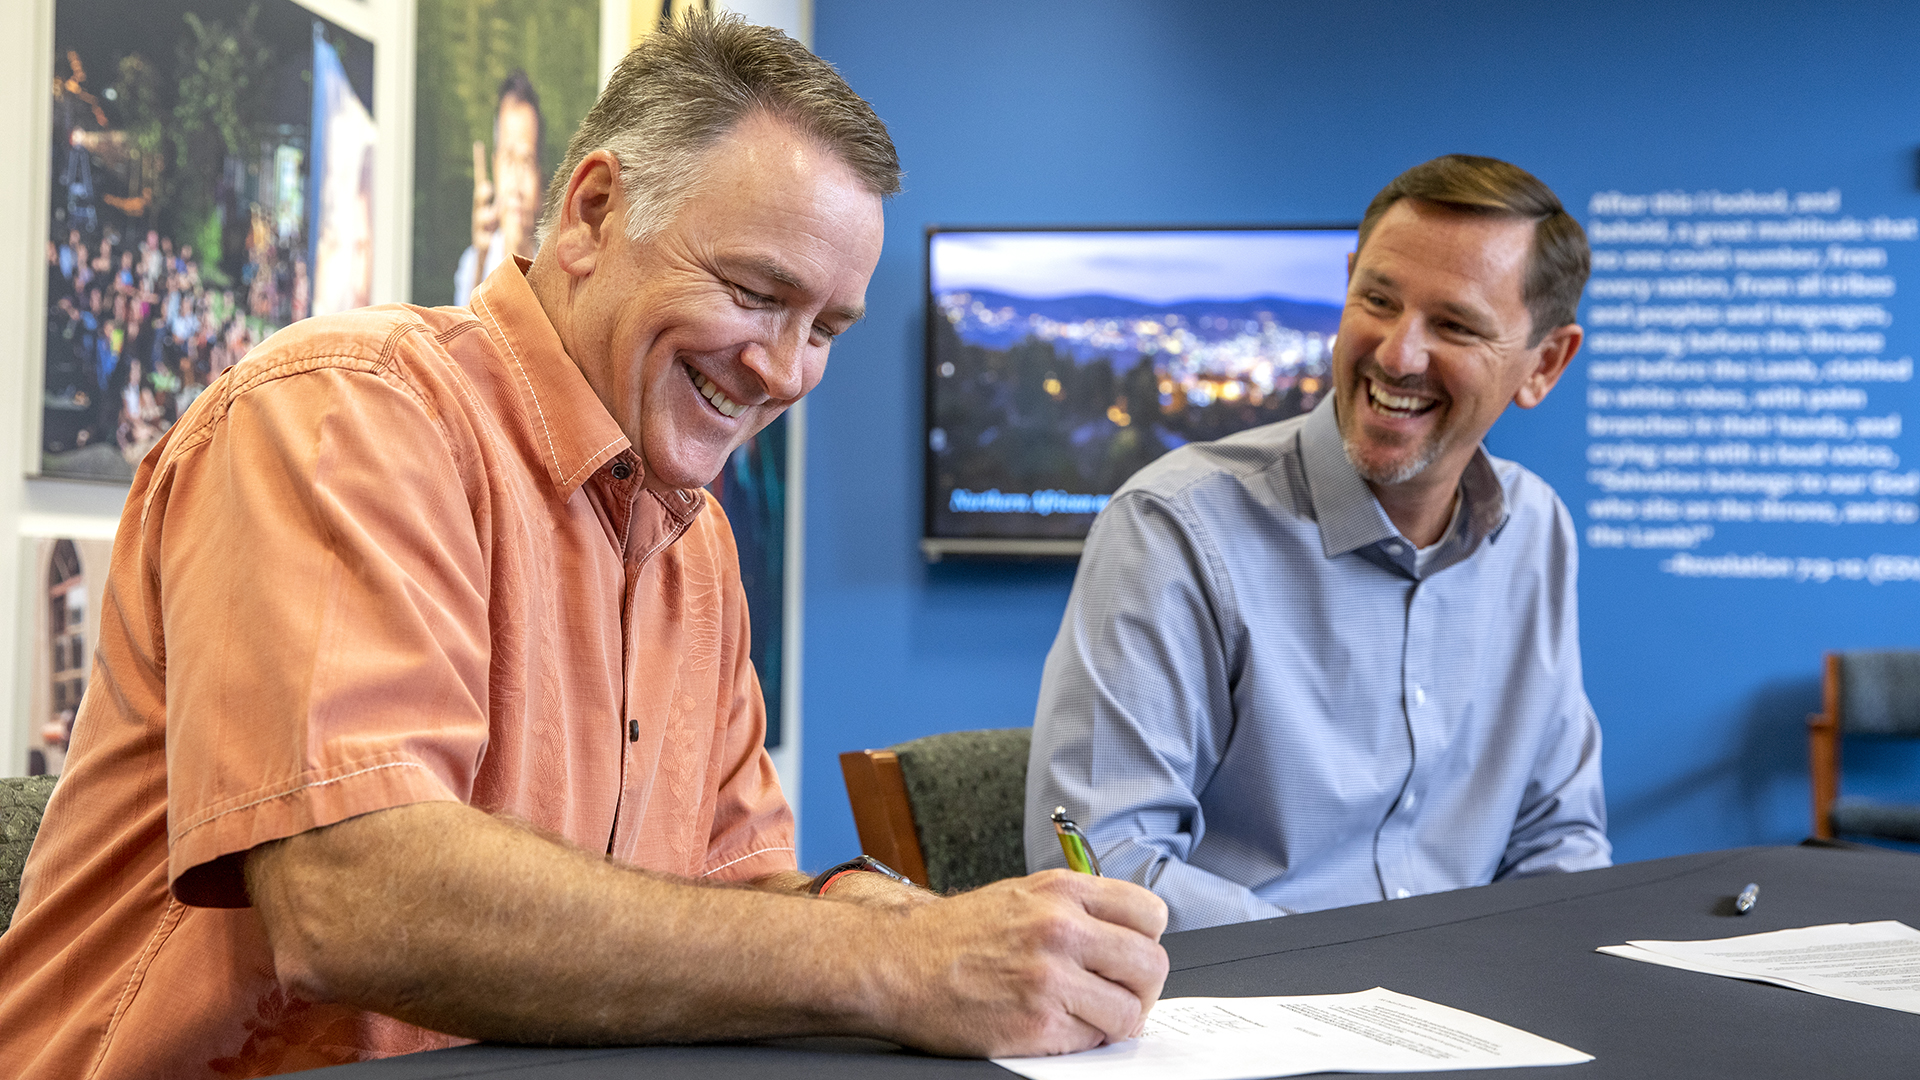 Chris Martin (left), executive director of the Hawaii Pacific Baptist Convention, and Paul Chitwood, IMB president, signed a three-year partnership agreement on August 31, 2020, at IMB’s Richmond, Virginia, home office. After welcoming Martin and his wife, Wendy, to Richmond, Chitwood affirmed the existing relationship between the two entities and the shared commitment to the Revelation 7:9 vision. (IMB photo)